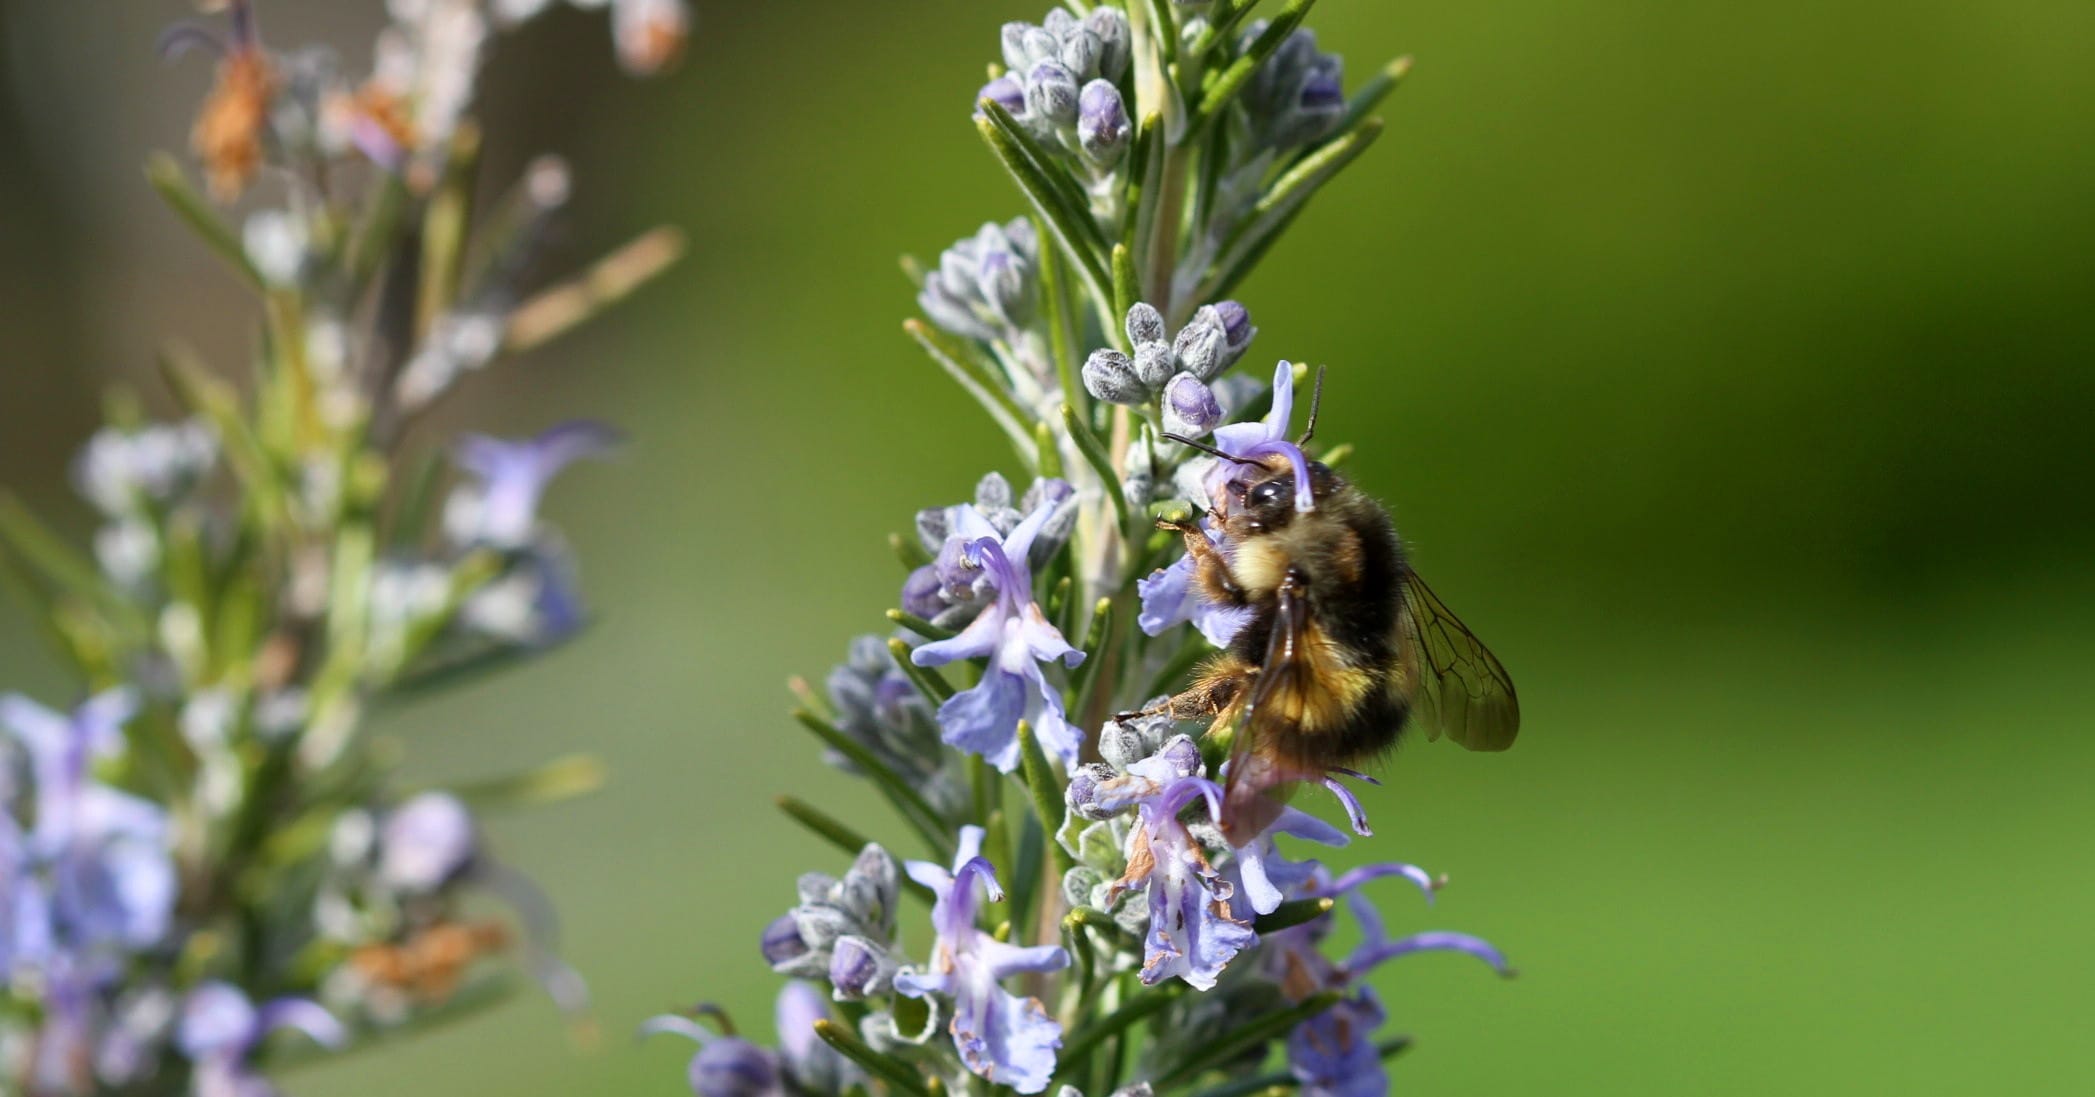 A bumble bee searches for nectar from a Rosemary plant near Langley.